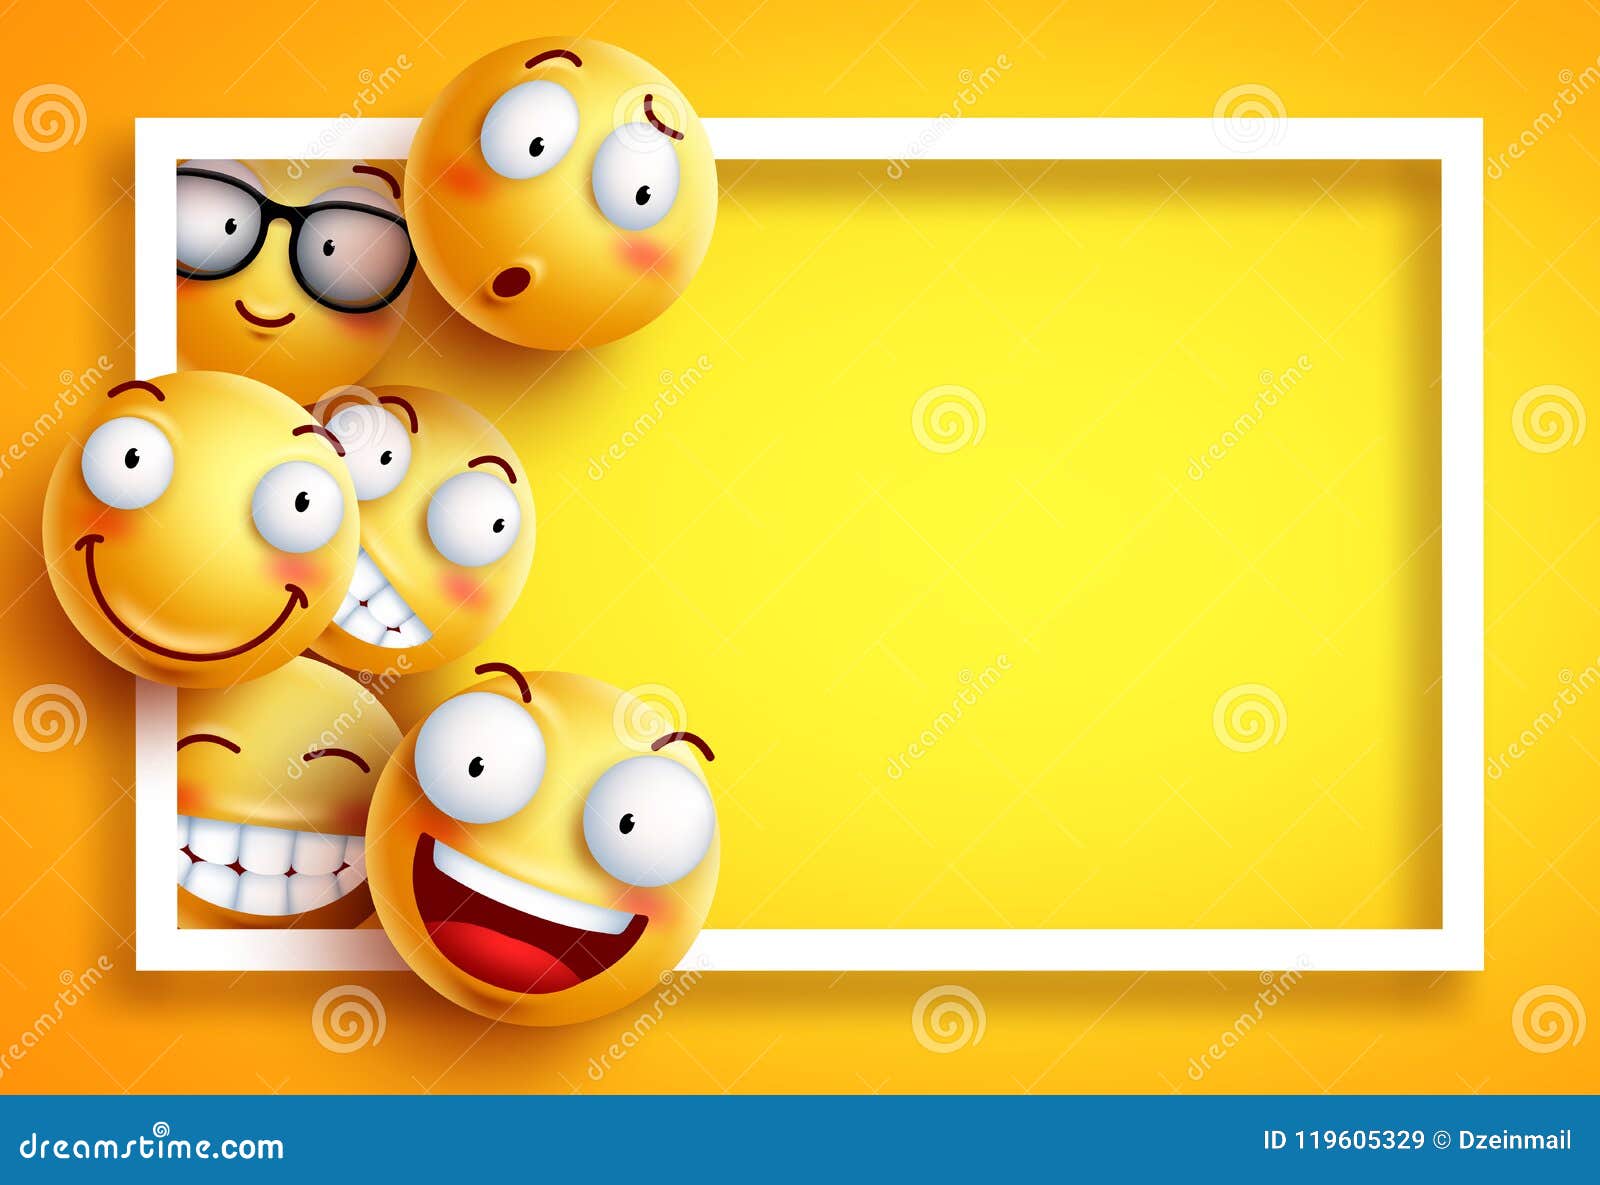 Smiley Background Vector Template with Yellow Funny Smileys or Emoticons  Stock Vector - Illustration of character, cartoon: 119605329